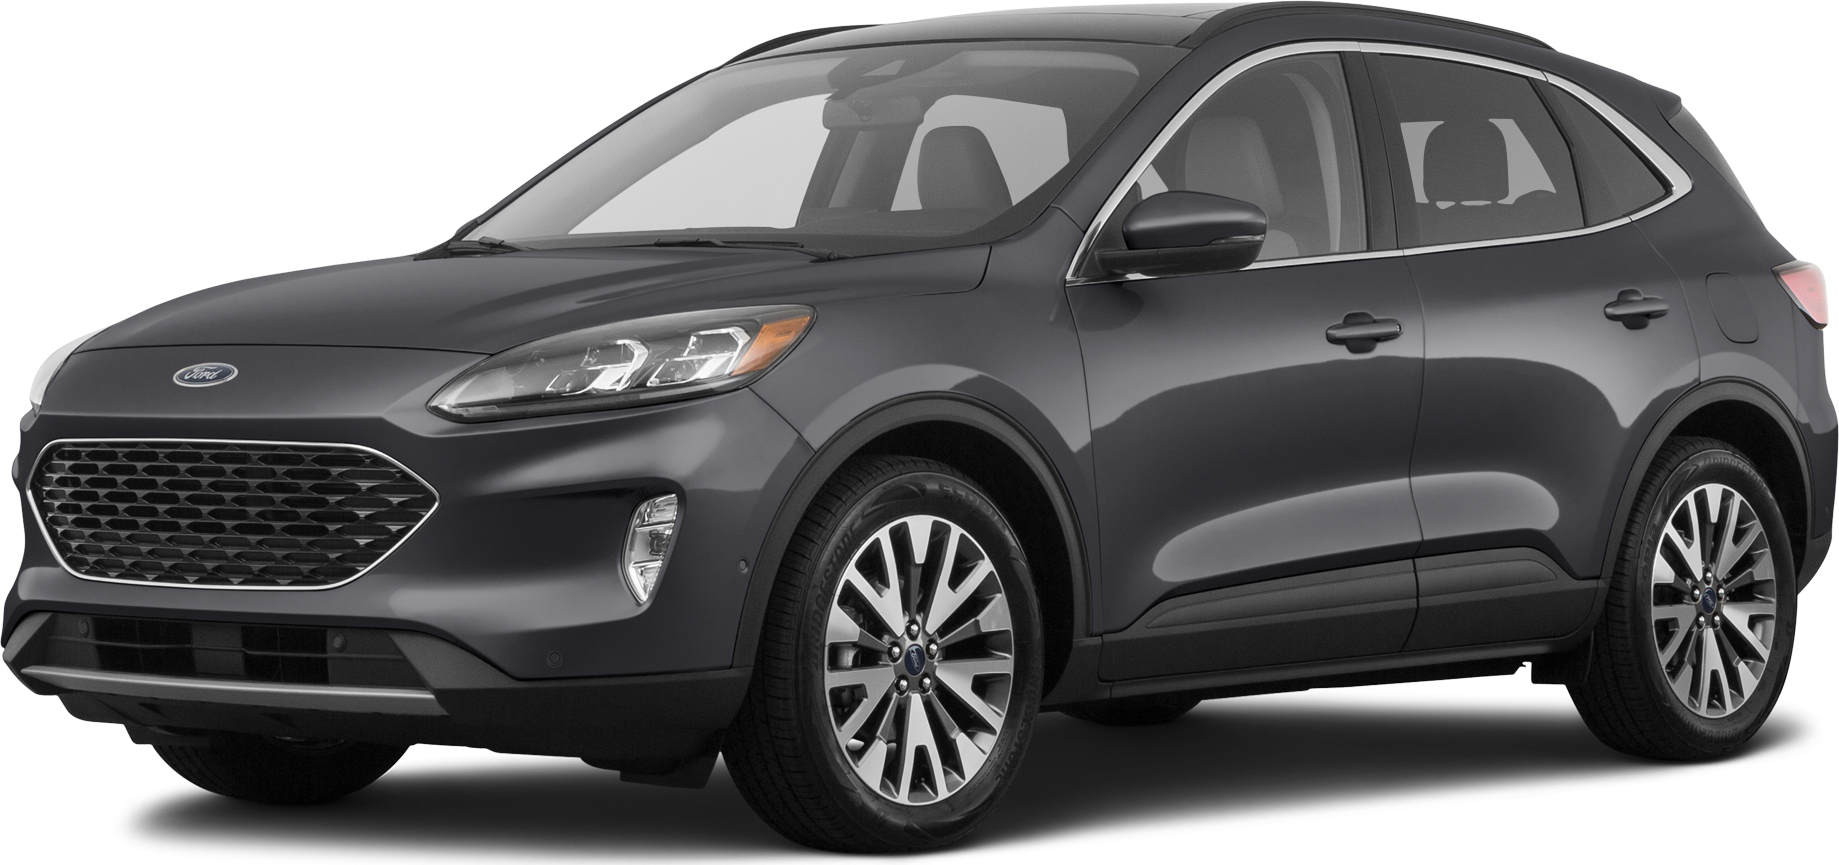 2020 Ford Escape Plugin Hybrid Price, Value, Ratings & Reviews